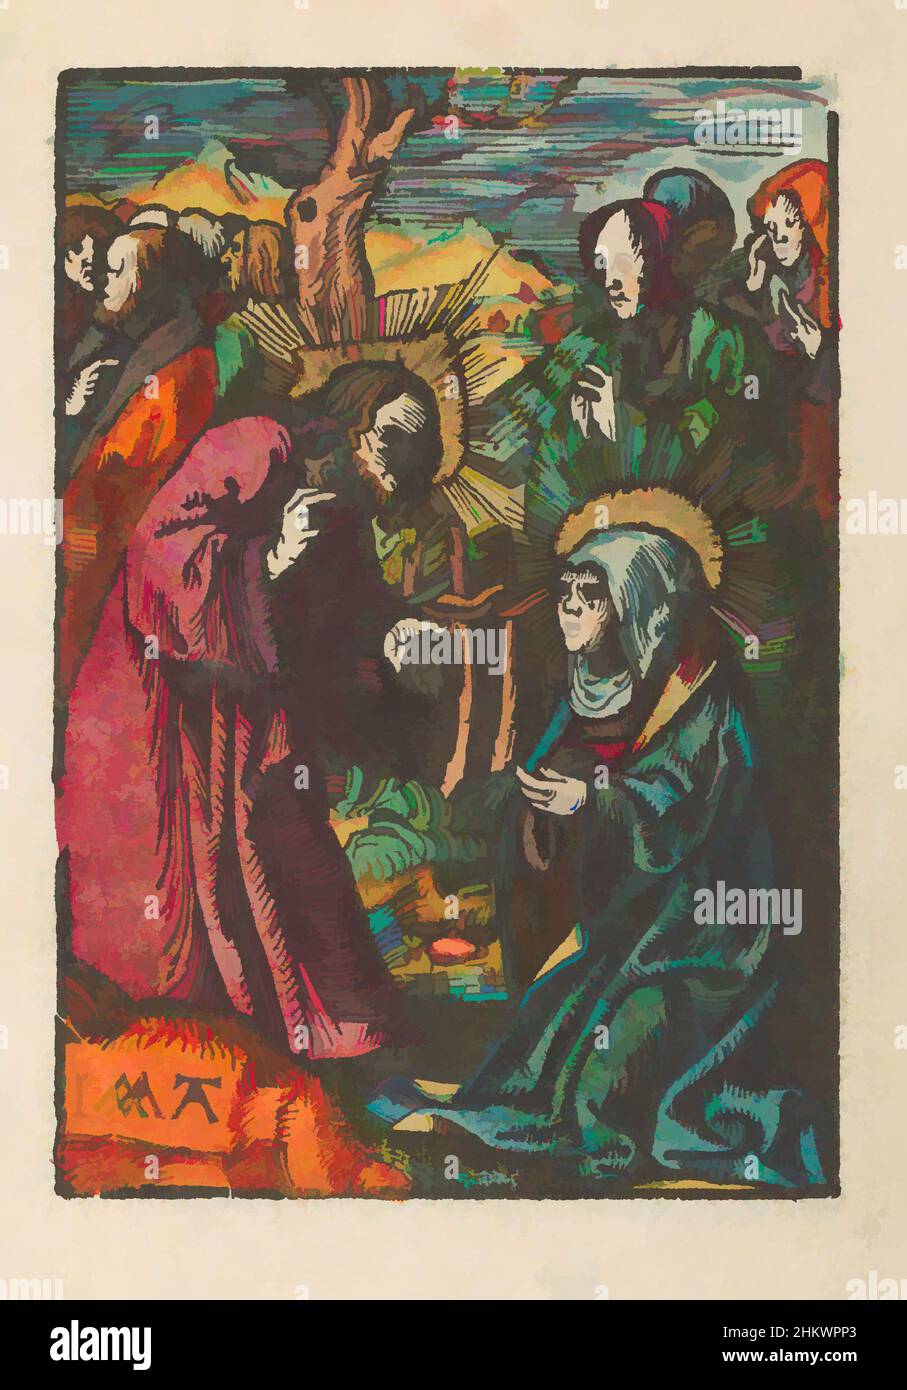 Art inspired by Christ takes leave of his mother, The little Passion (series title), Stupid Passion (series title), Christ takes leave of his mother Mary, who kneels before him. She is followed by two other women. To the left are the disciples. Print is part of a book., print maker, Classic works modernized by Artotop with a splash of modernity. Shapes, color and value, eye-catching visual impact on art. Emotions through freedom of artworks in a contemporary way. A timeless message pursuing a wildly creative new direction. Artists turning to the digital medium and creating the Artotop NFT Stock Photo